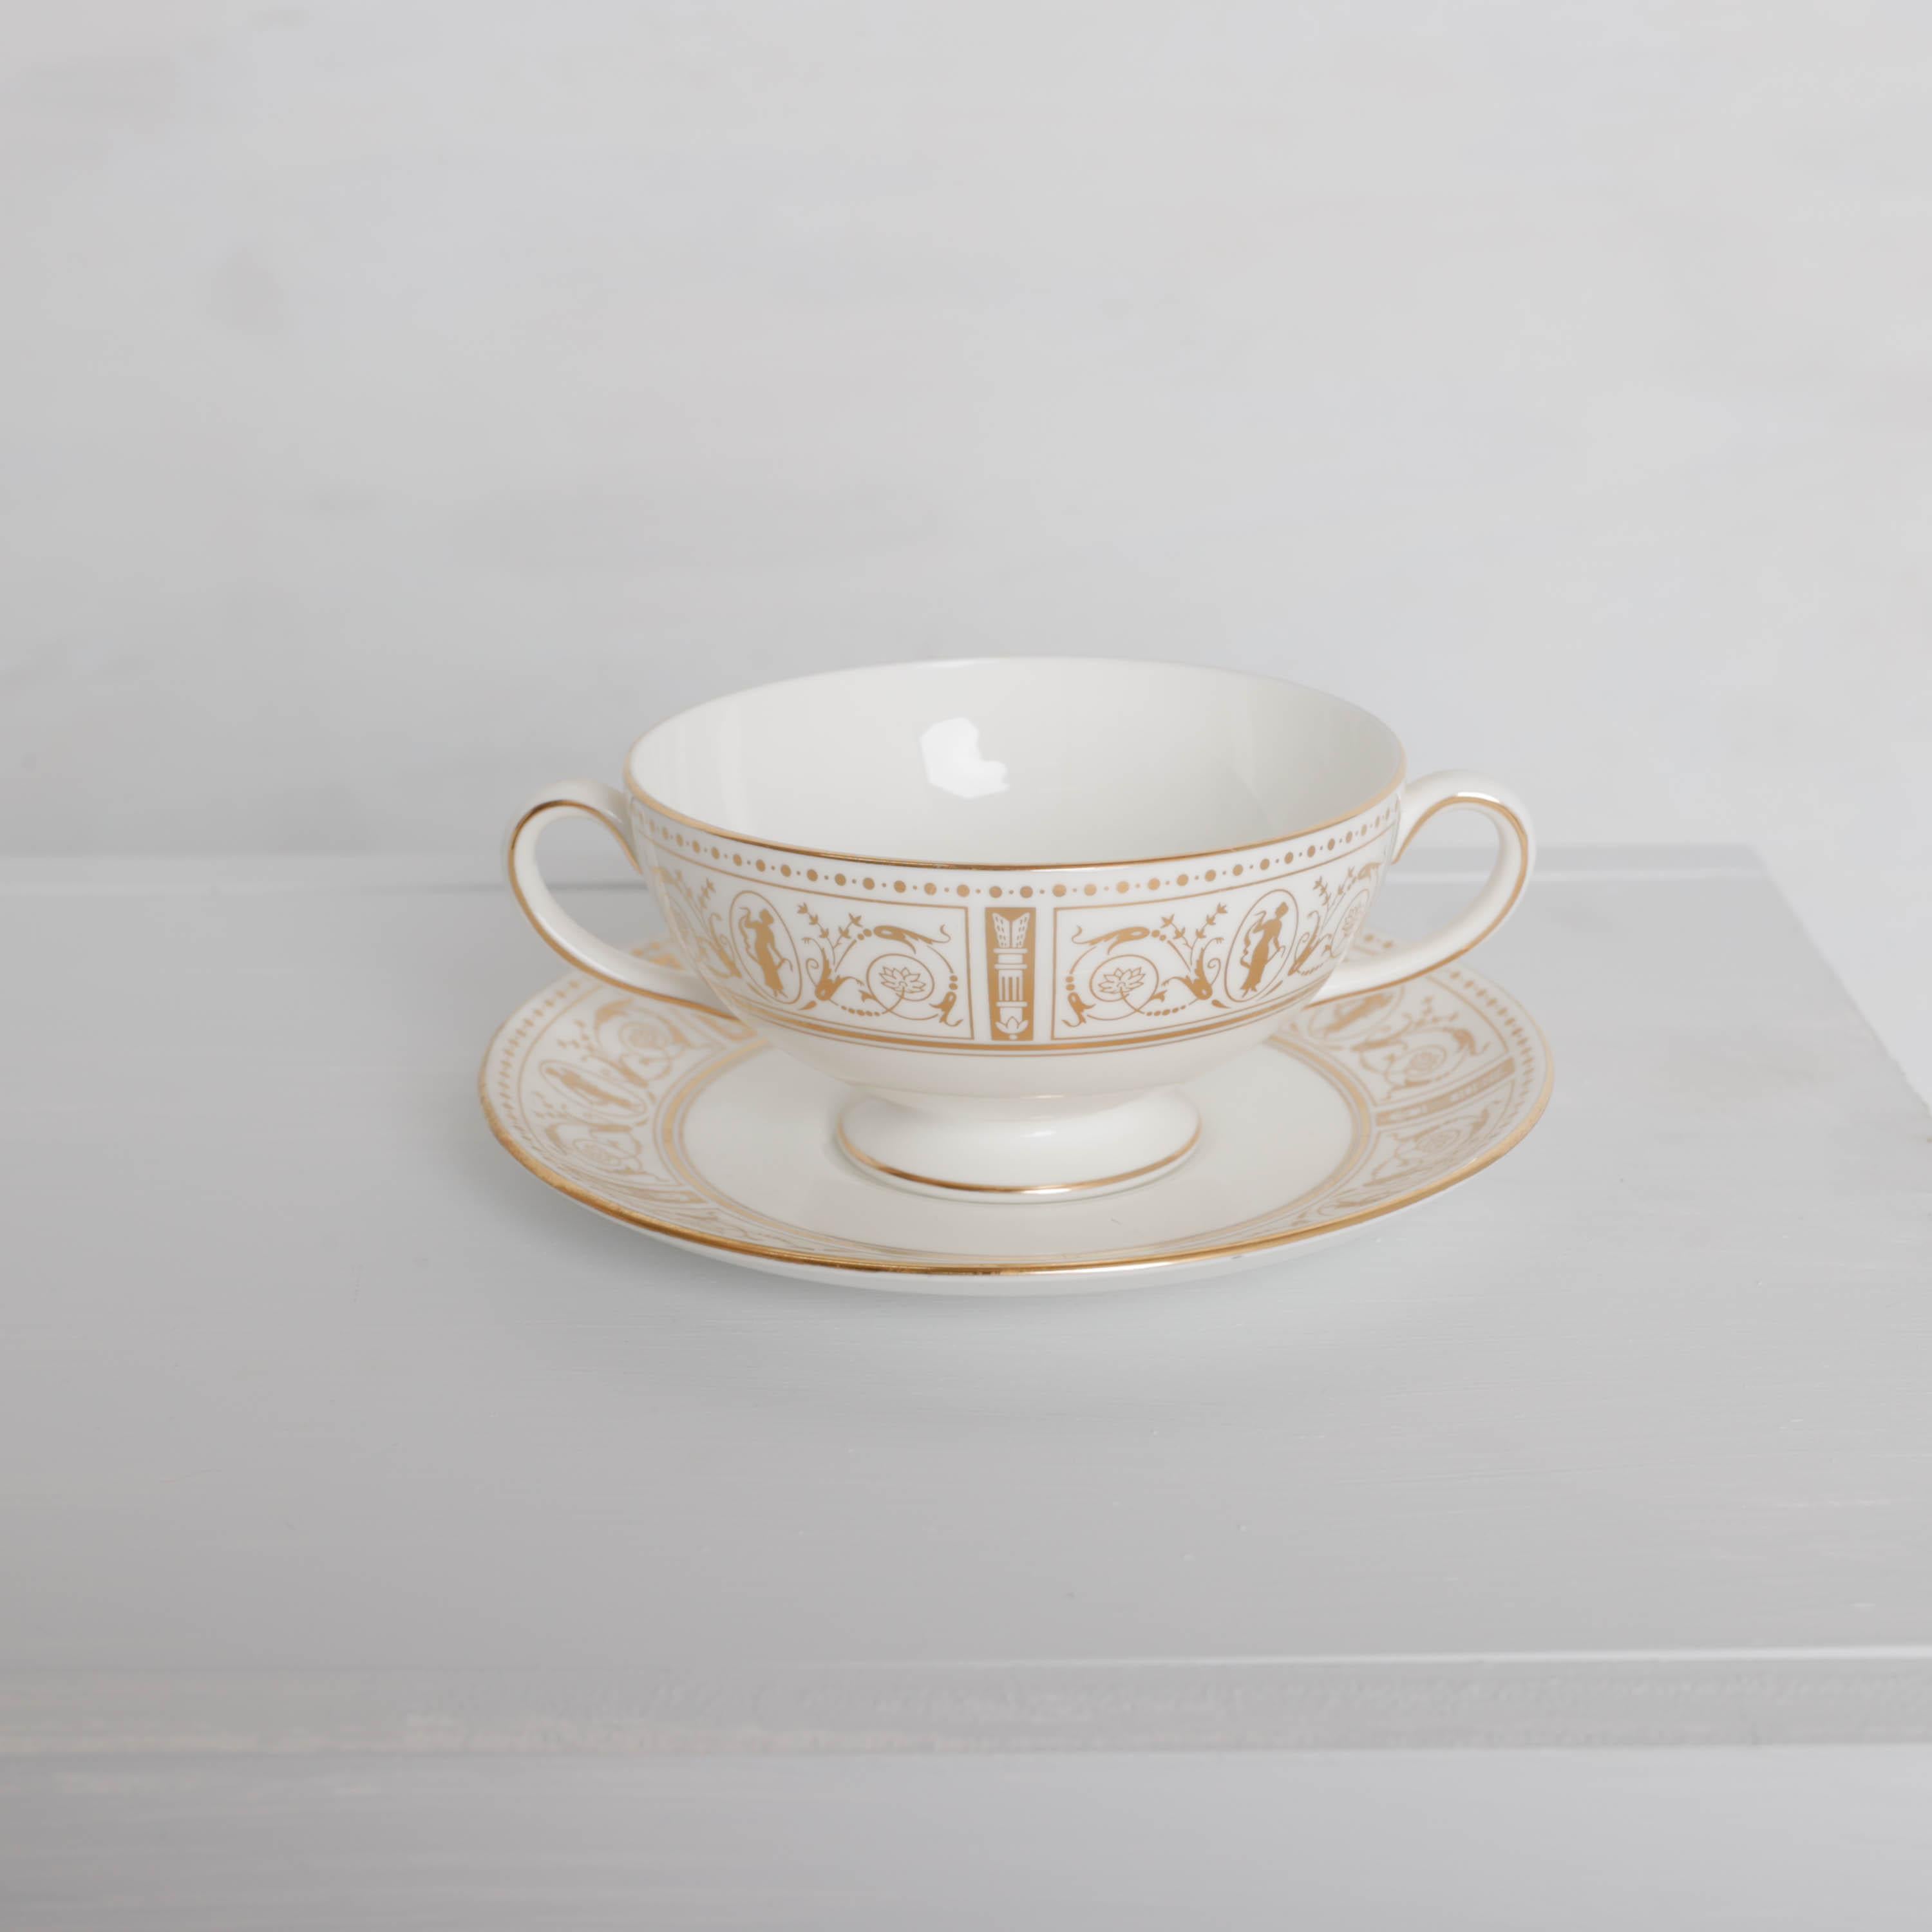 China Service for 12 Wedgewood Gold Grecian Circa 1964 For Sale 7